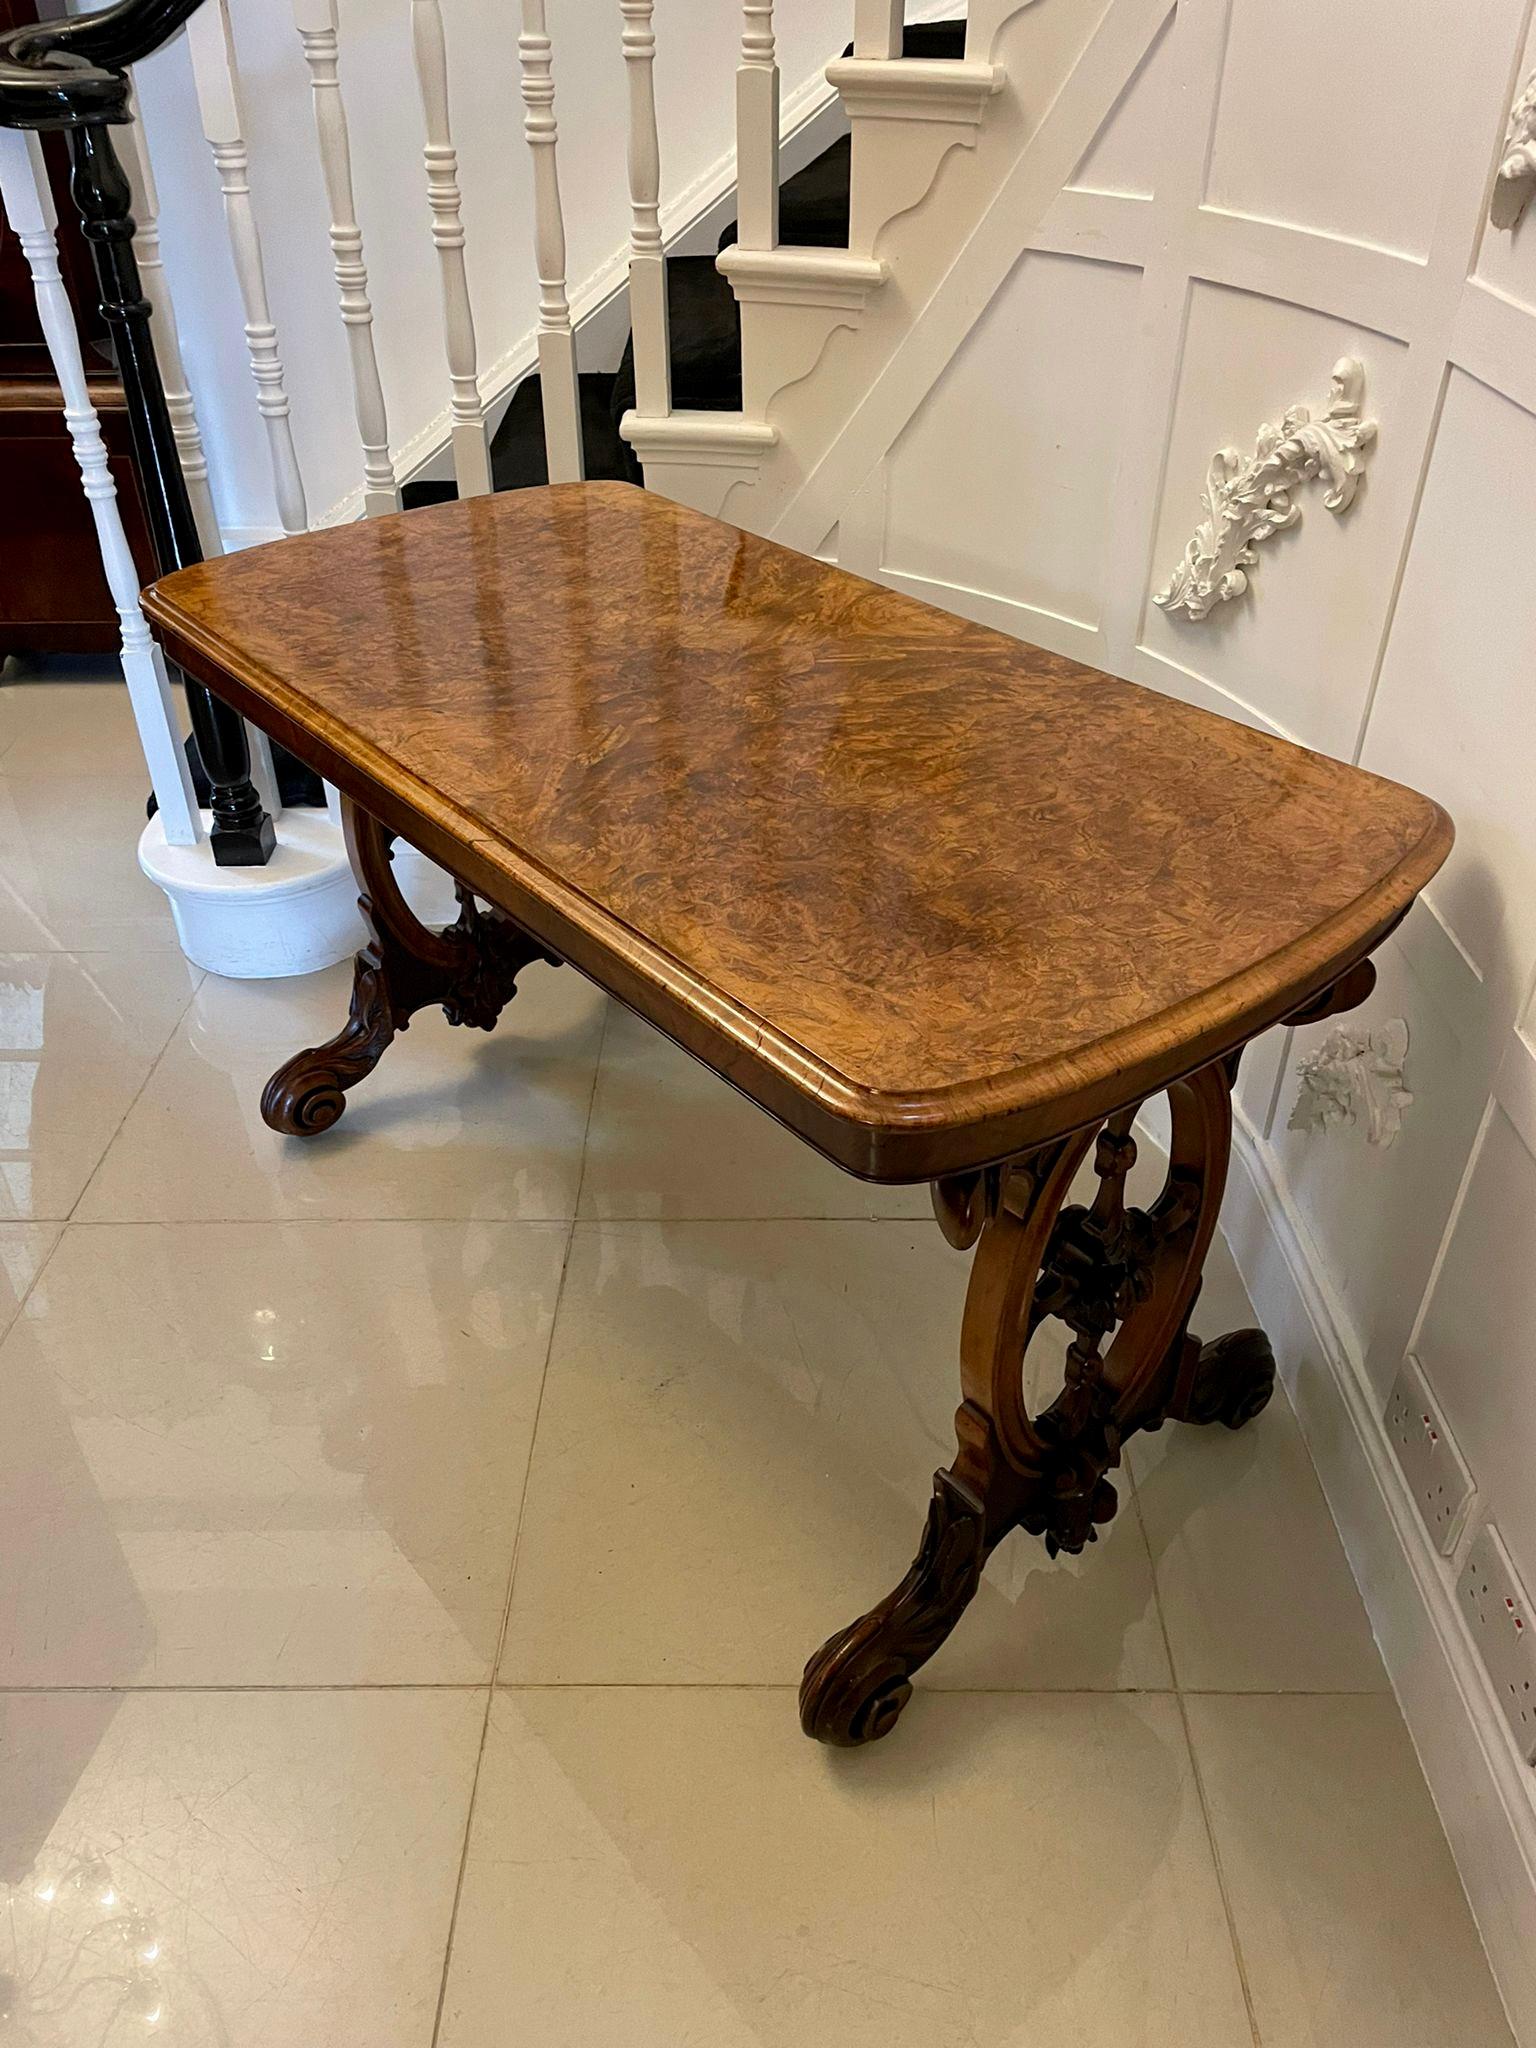 Superb quality antique Victorian burr walnut centre table having a superb quality burr walnut top with a moulded edge supported by outstanding carved solid walnut ends with beautifully carved fruit, flowers, leaves and scrolls standing on shaped